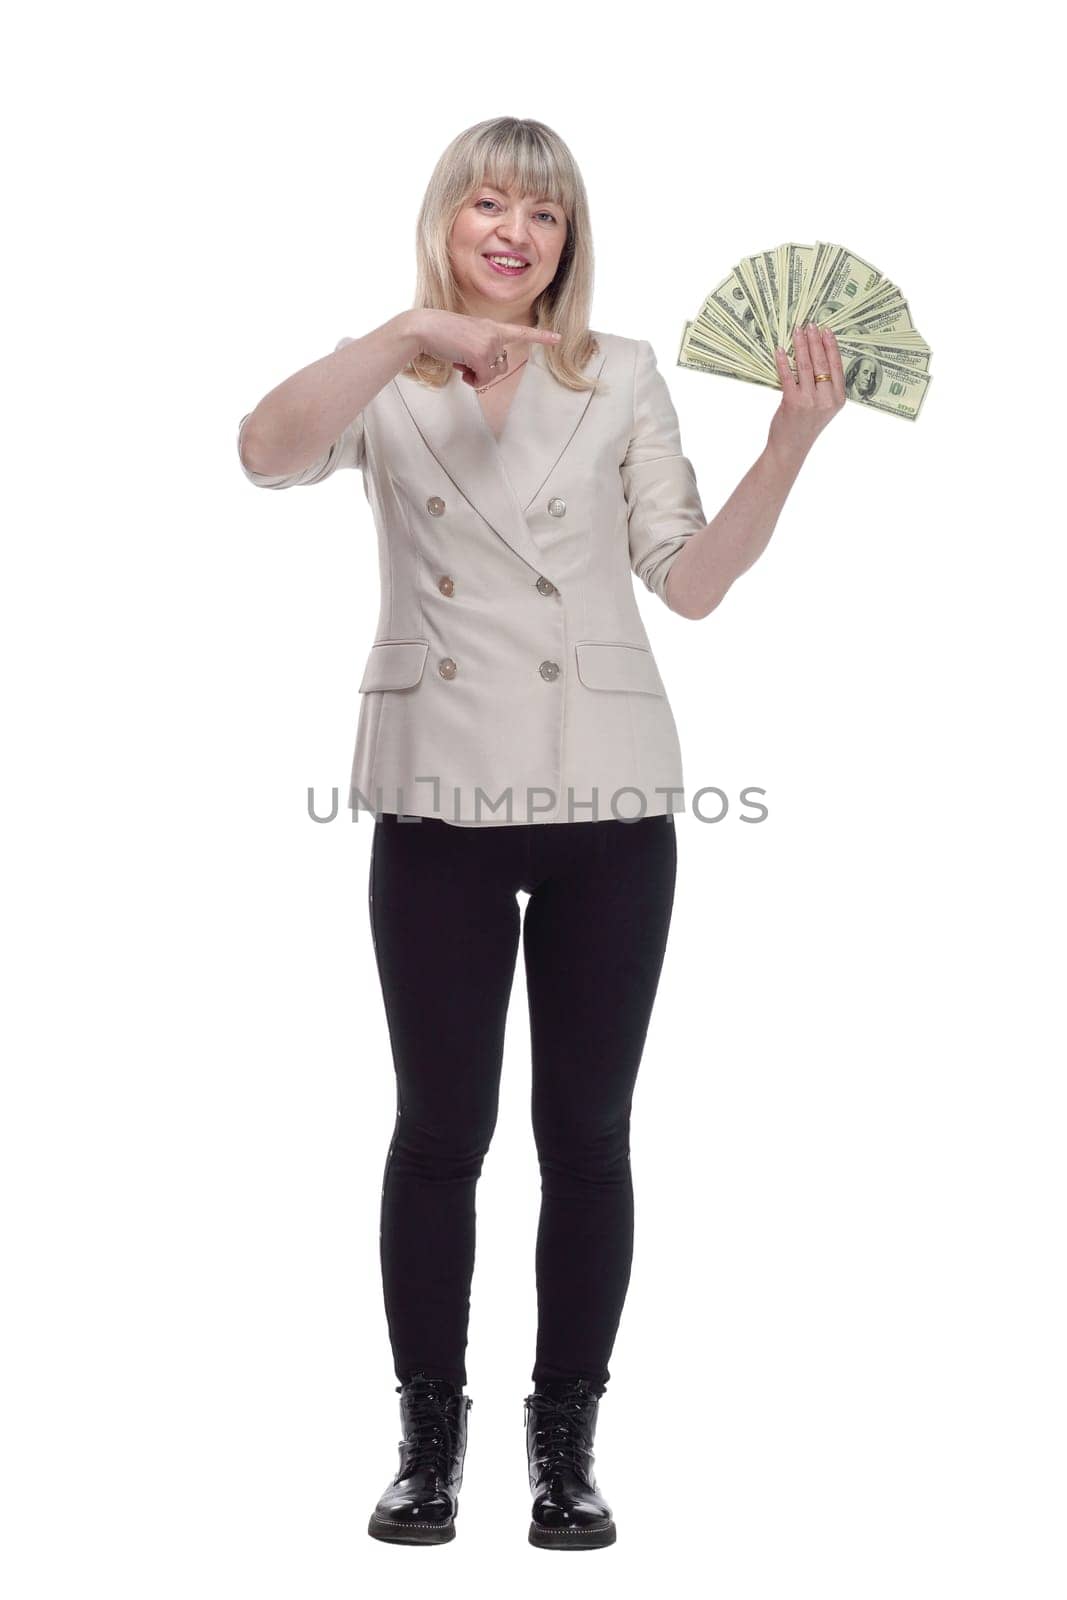 very happy woman with dollar bills. isolated on a white background. by asdf